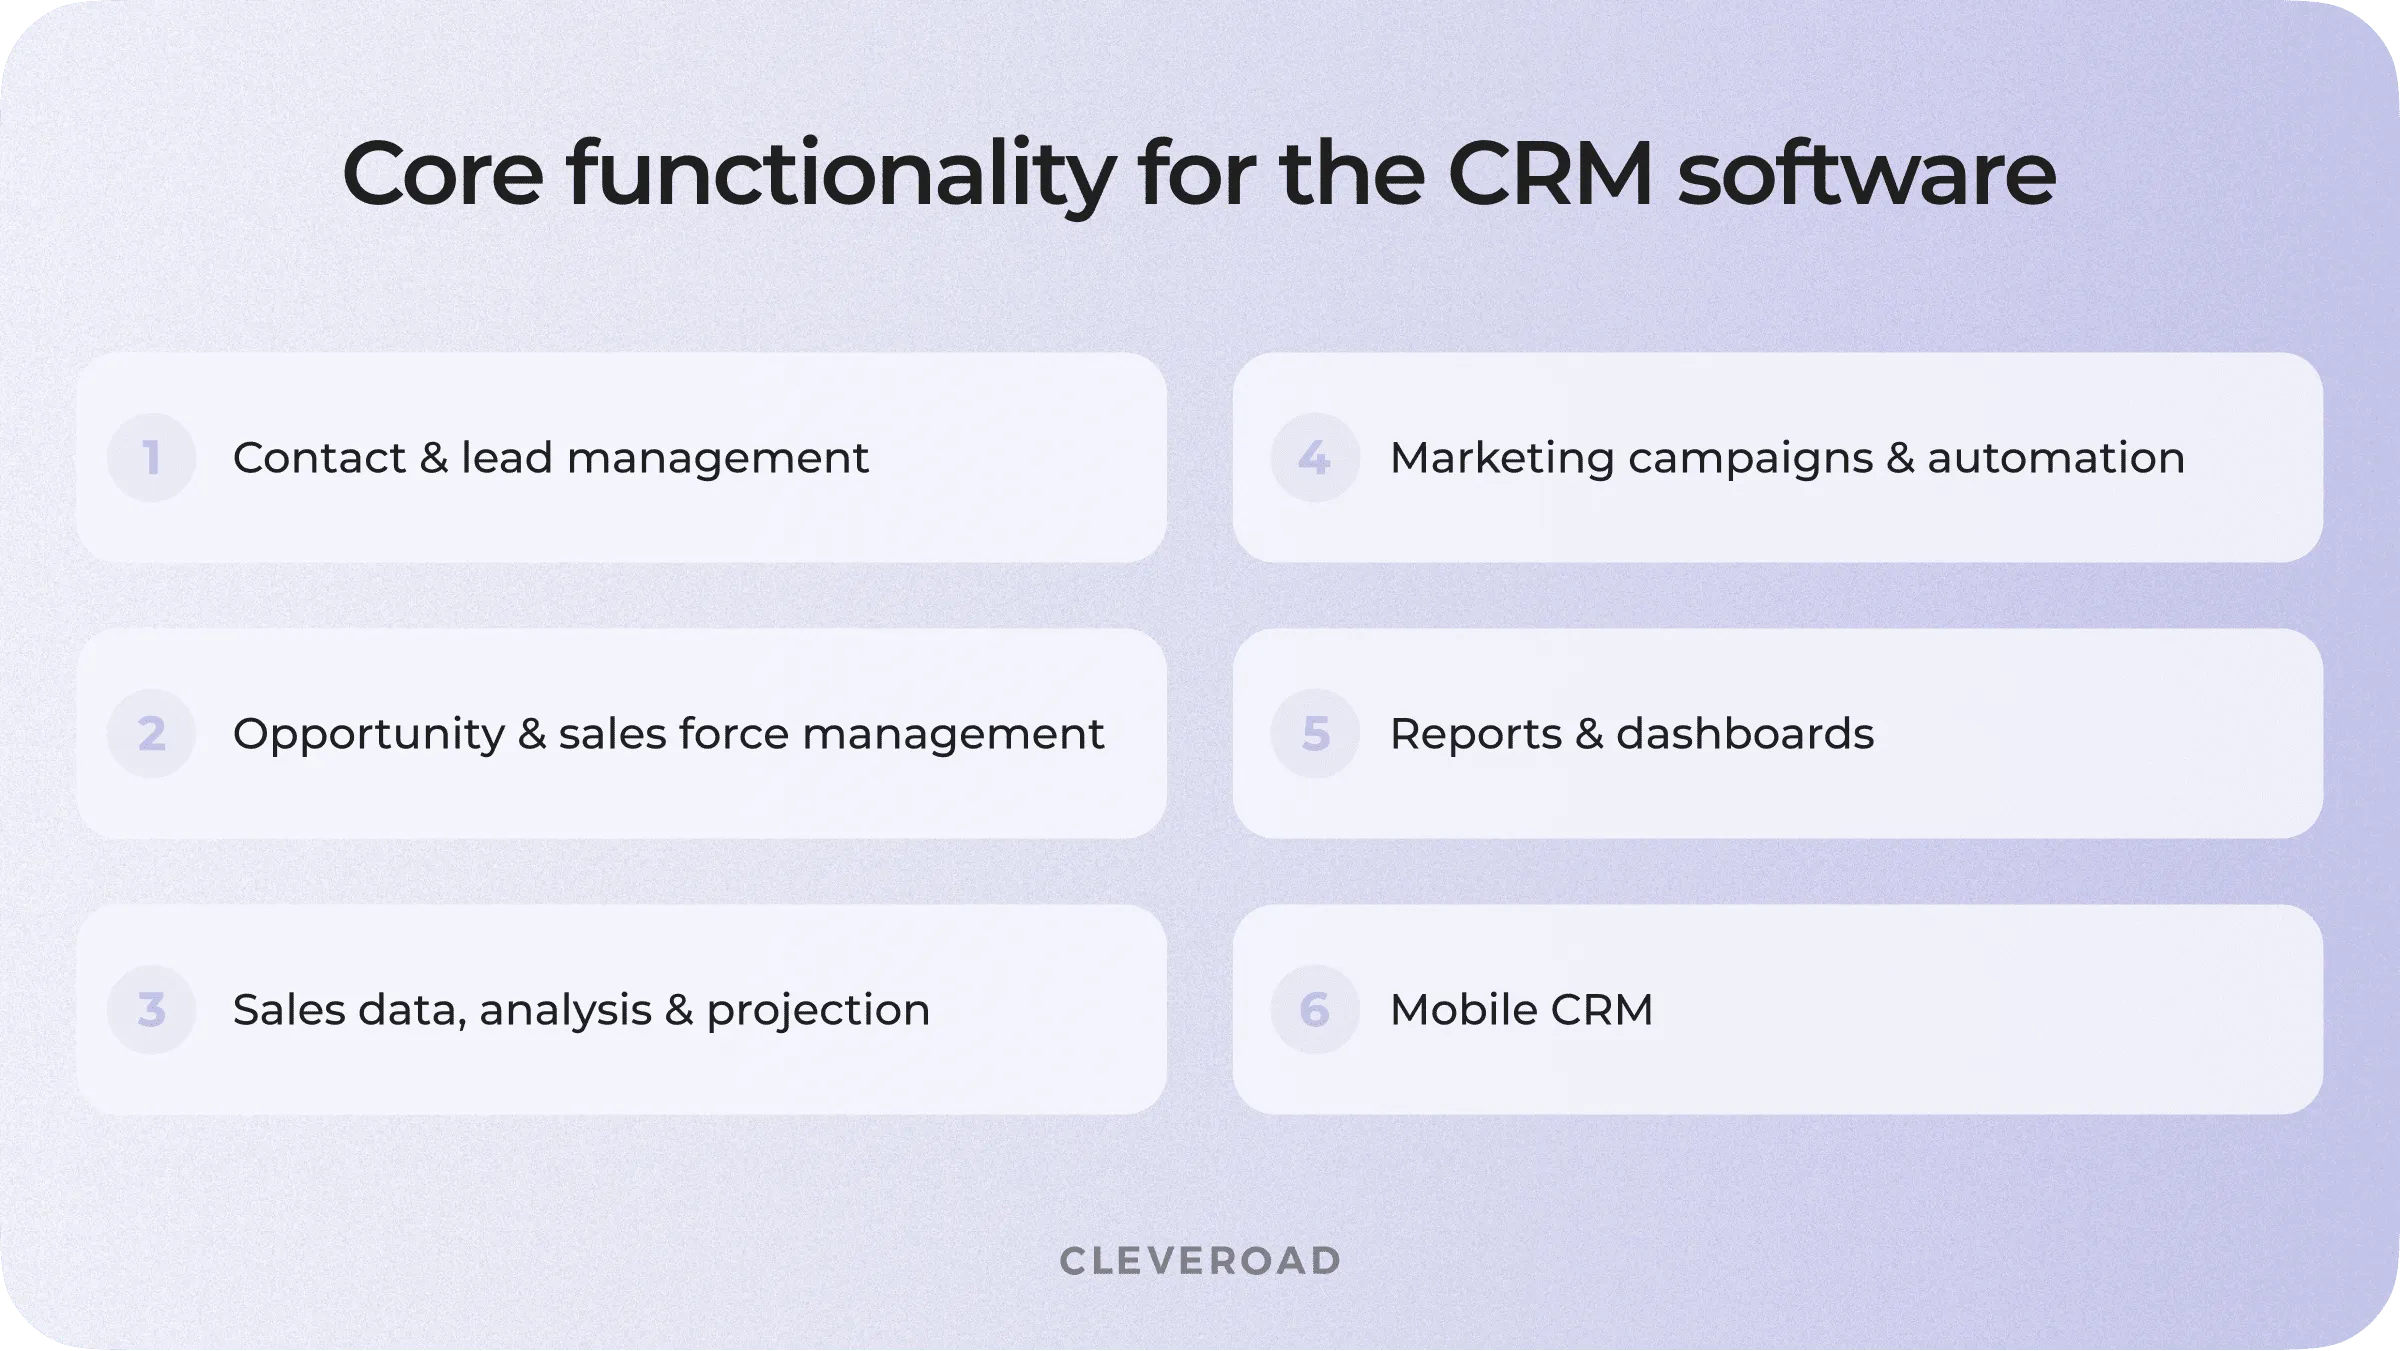 Basic features for CRM software